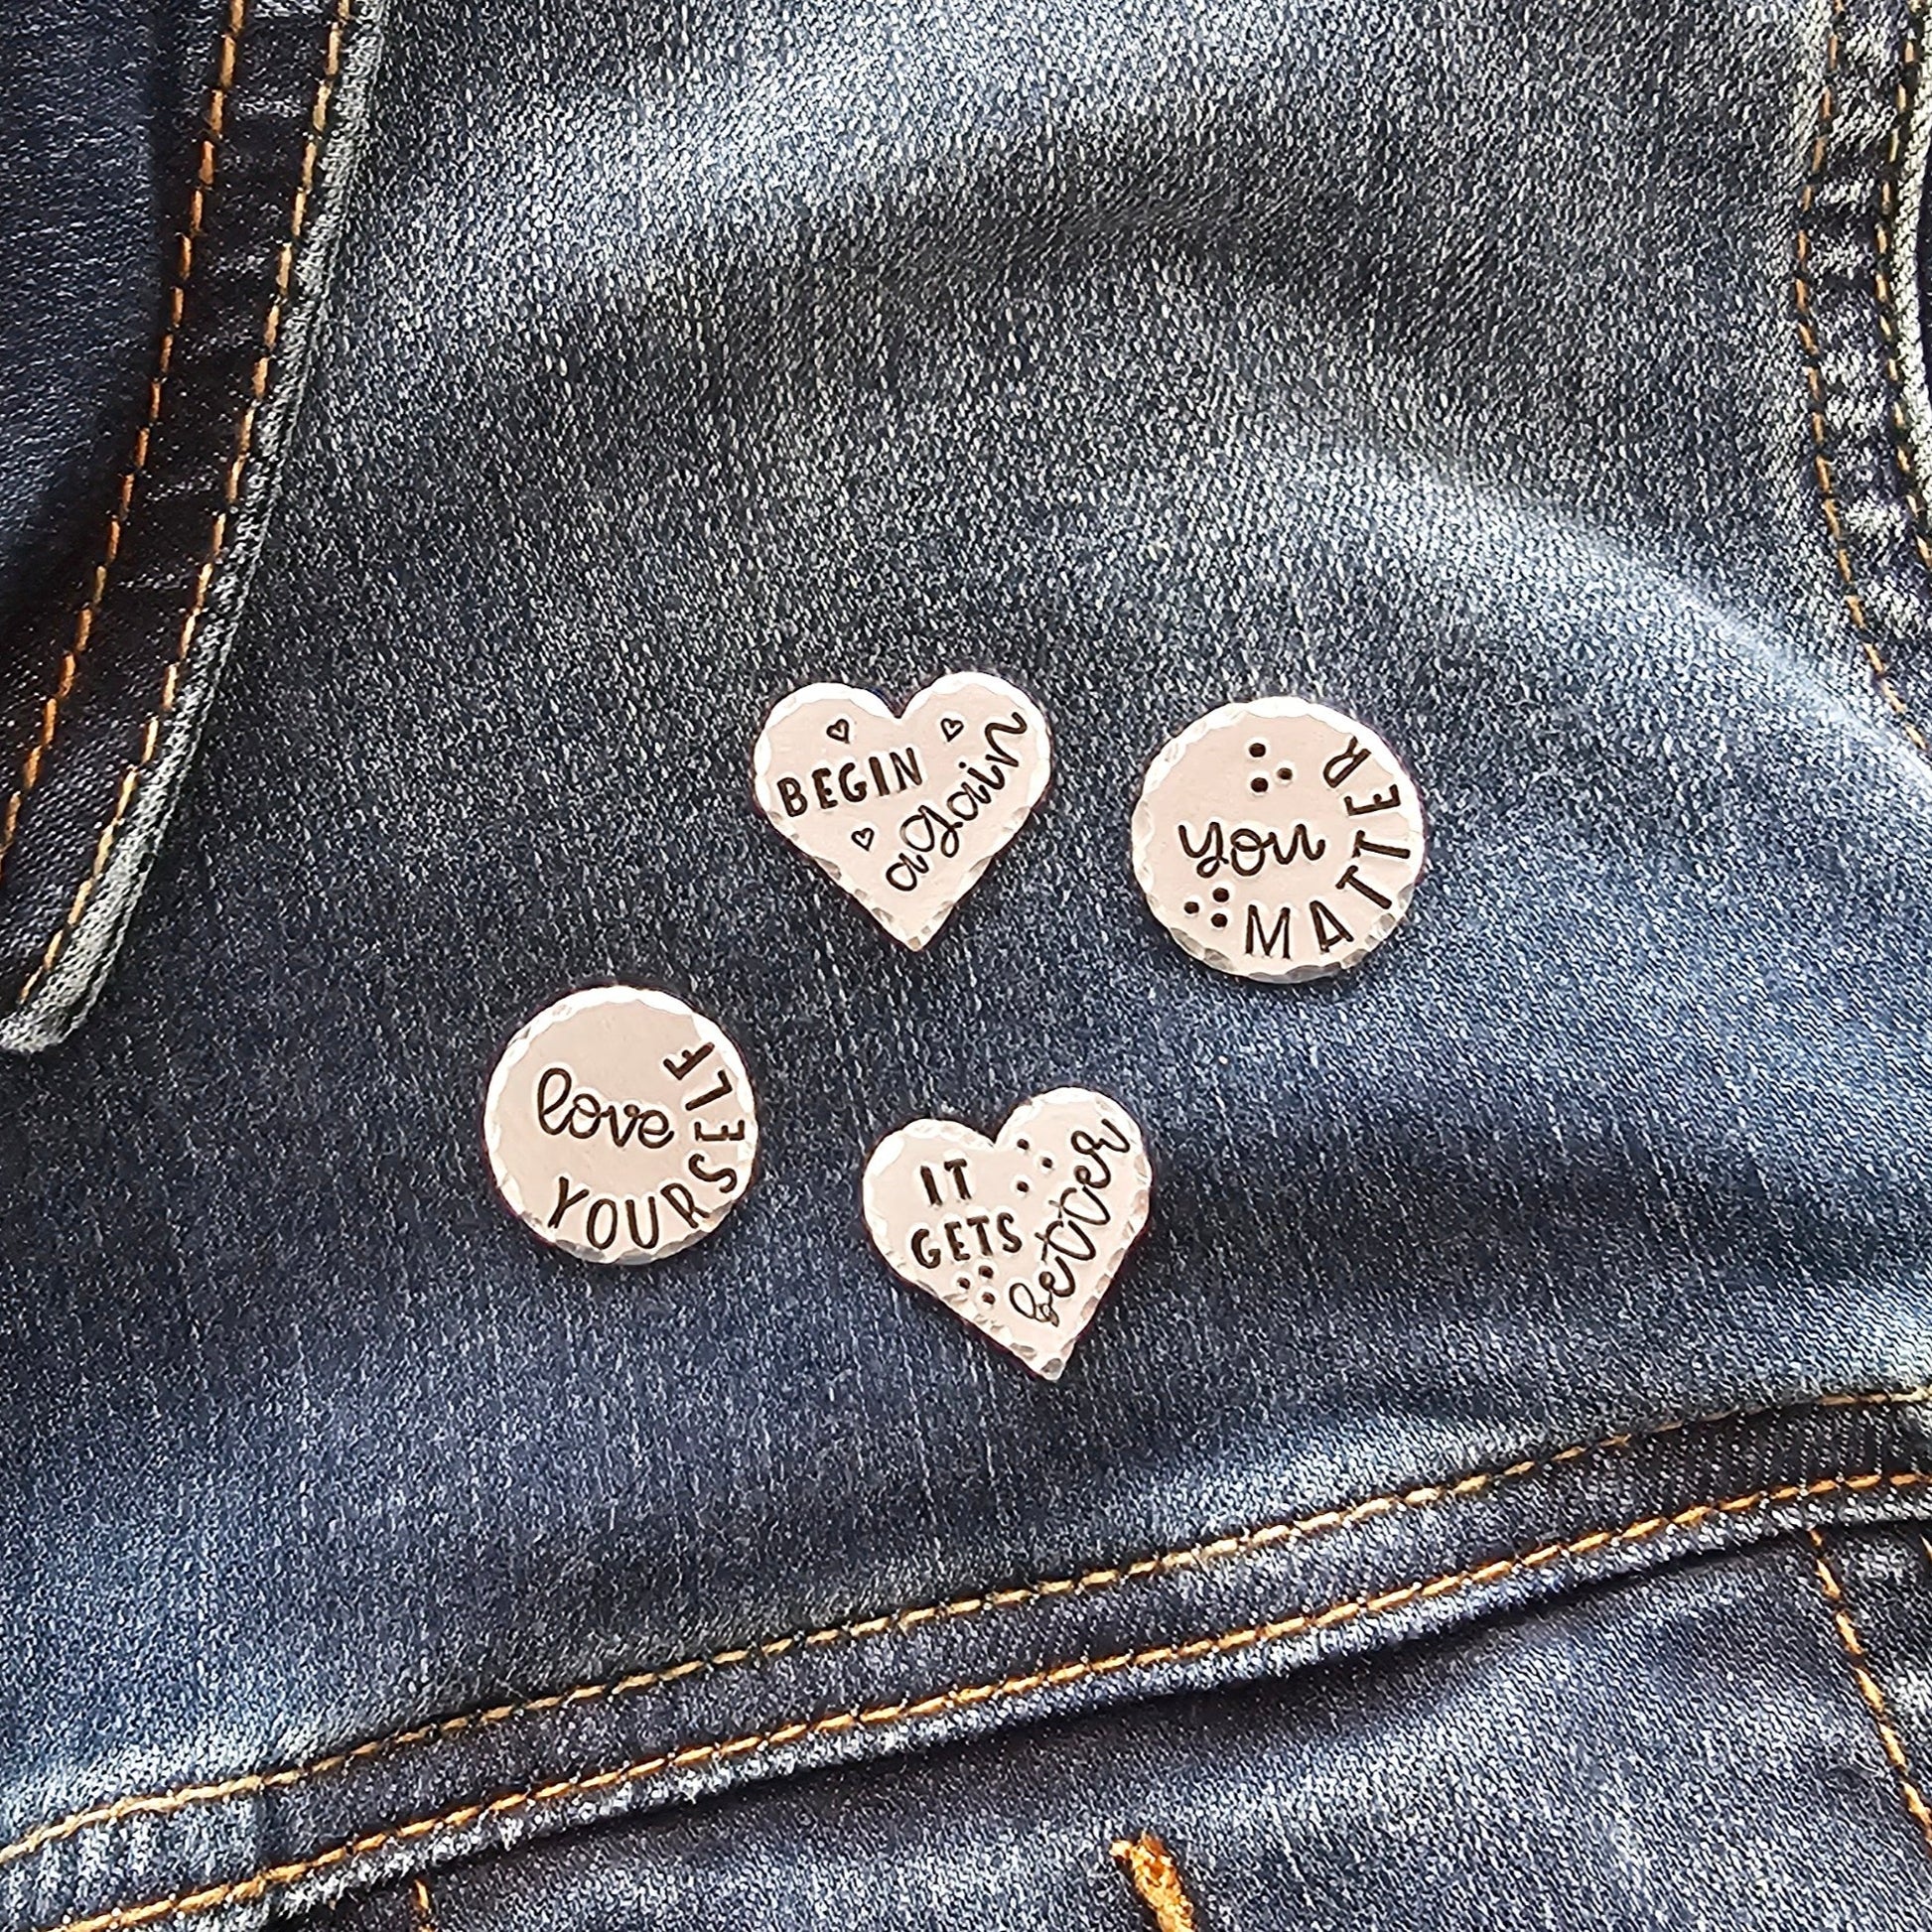 Jean jacket with 4 silver pins. 2 pins are round and have the messages love yourself and you matter. The heart pins read begin again and it gets better. The messages are handstamped onto the tags to leave a deep impression.